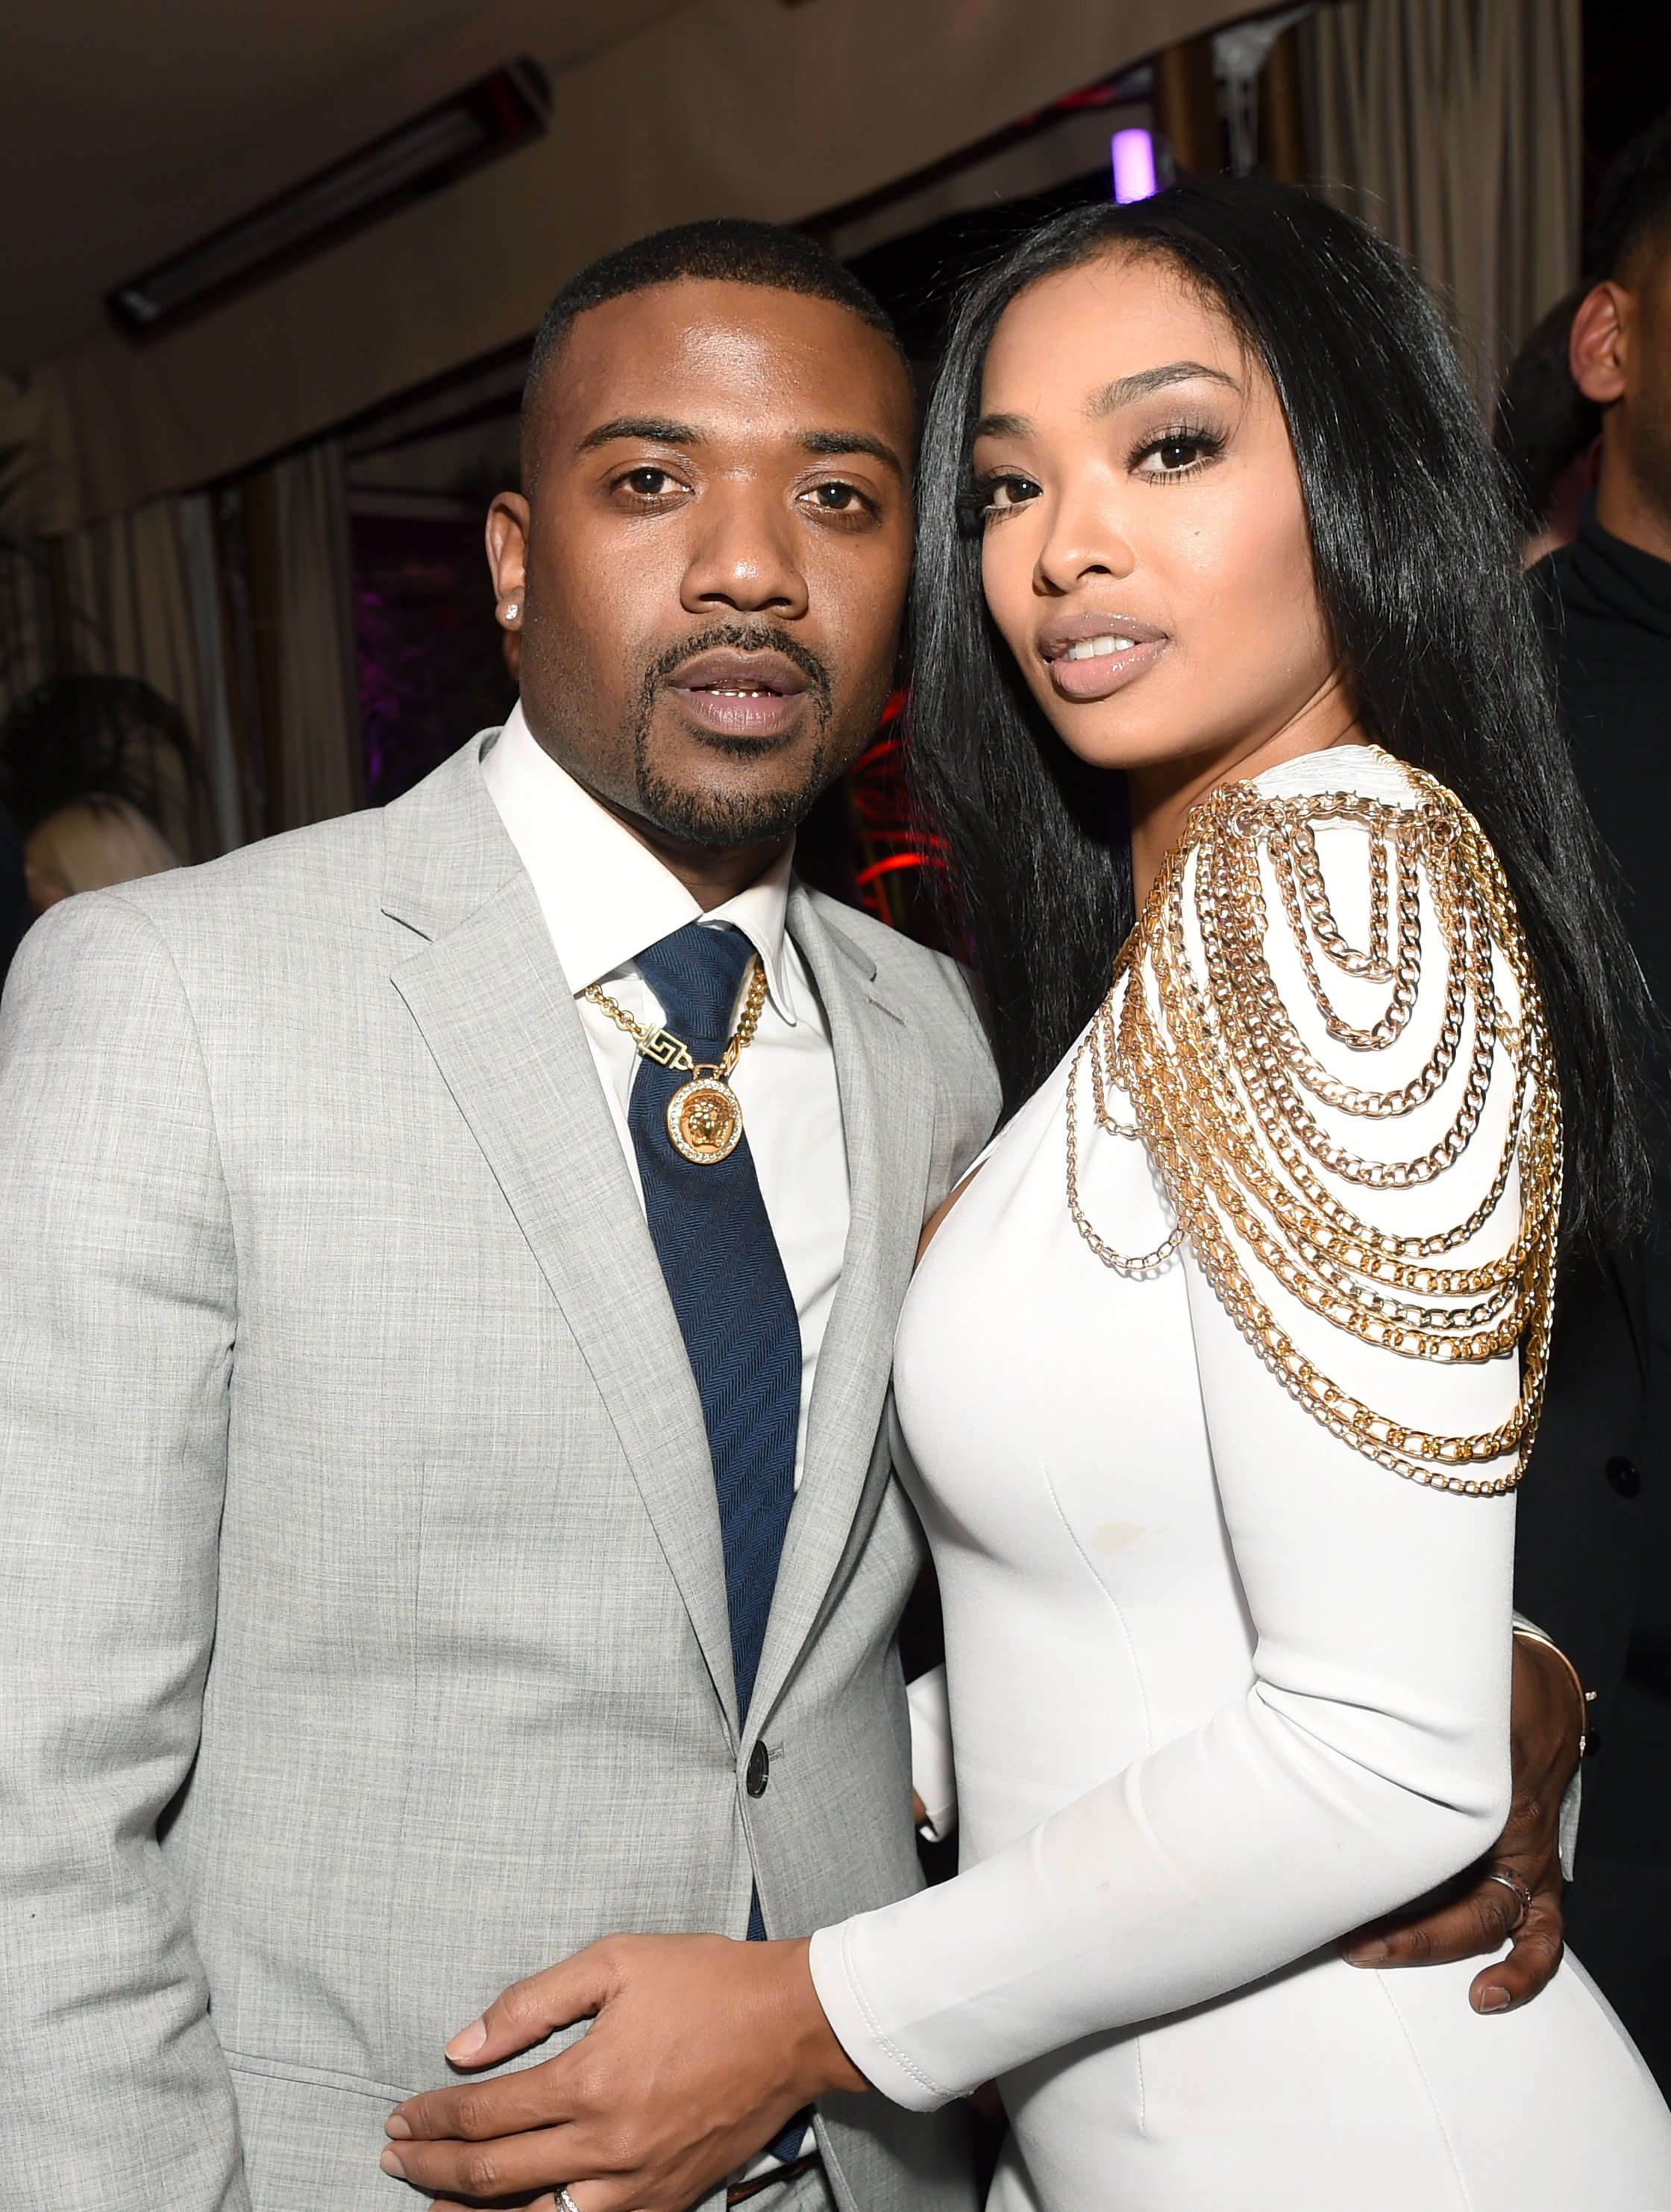 Ray J & Princess Love at Chateau Marmont on Feb. 12, 2017 in Los Angeles, California | Photo: Getty Images